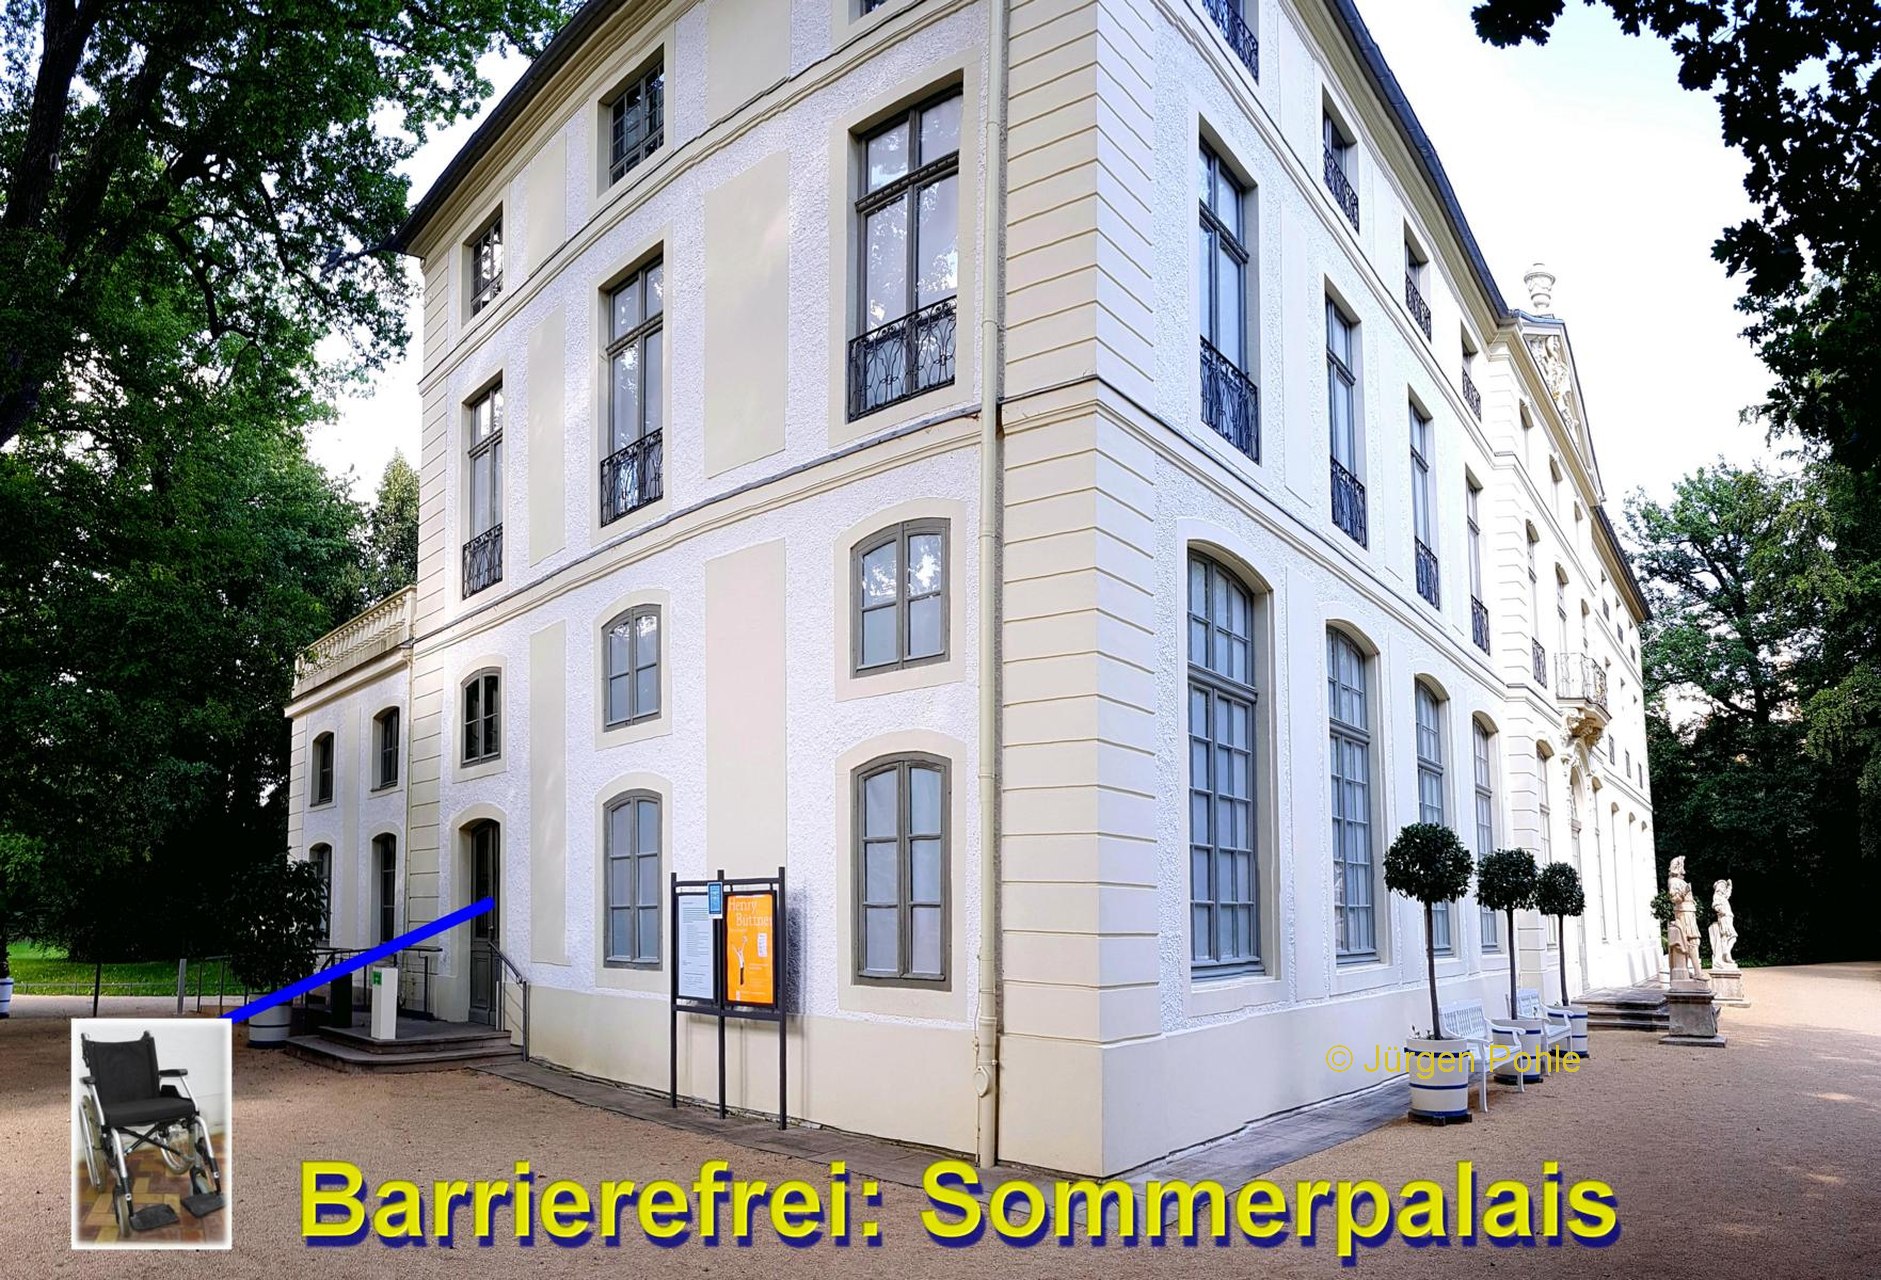 Barrierefrei - Sommerpalais